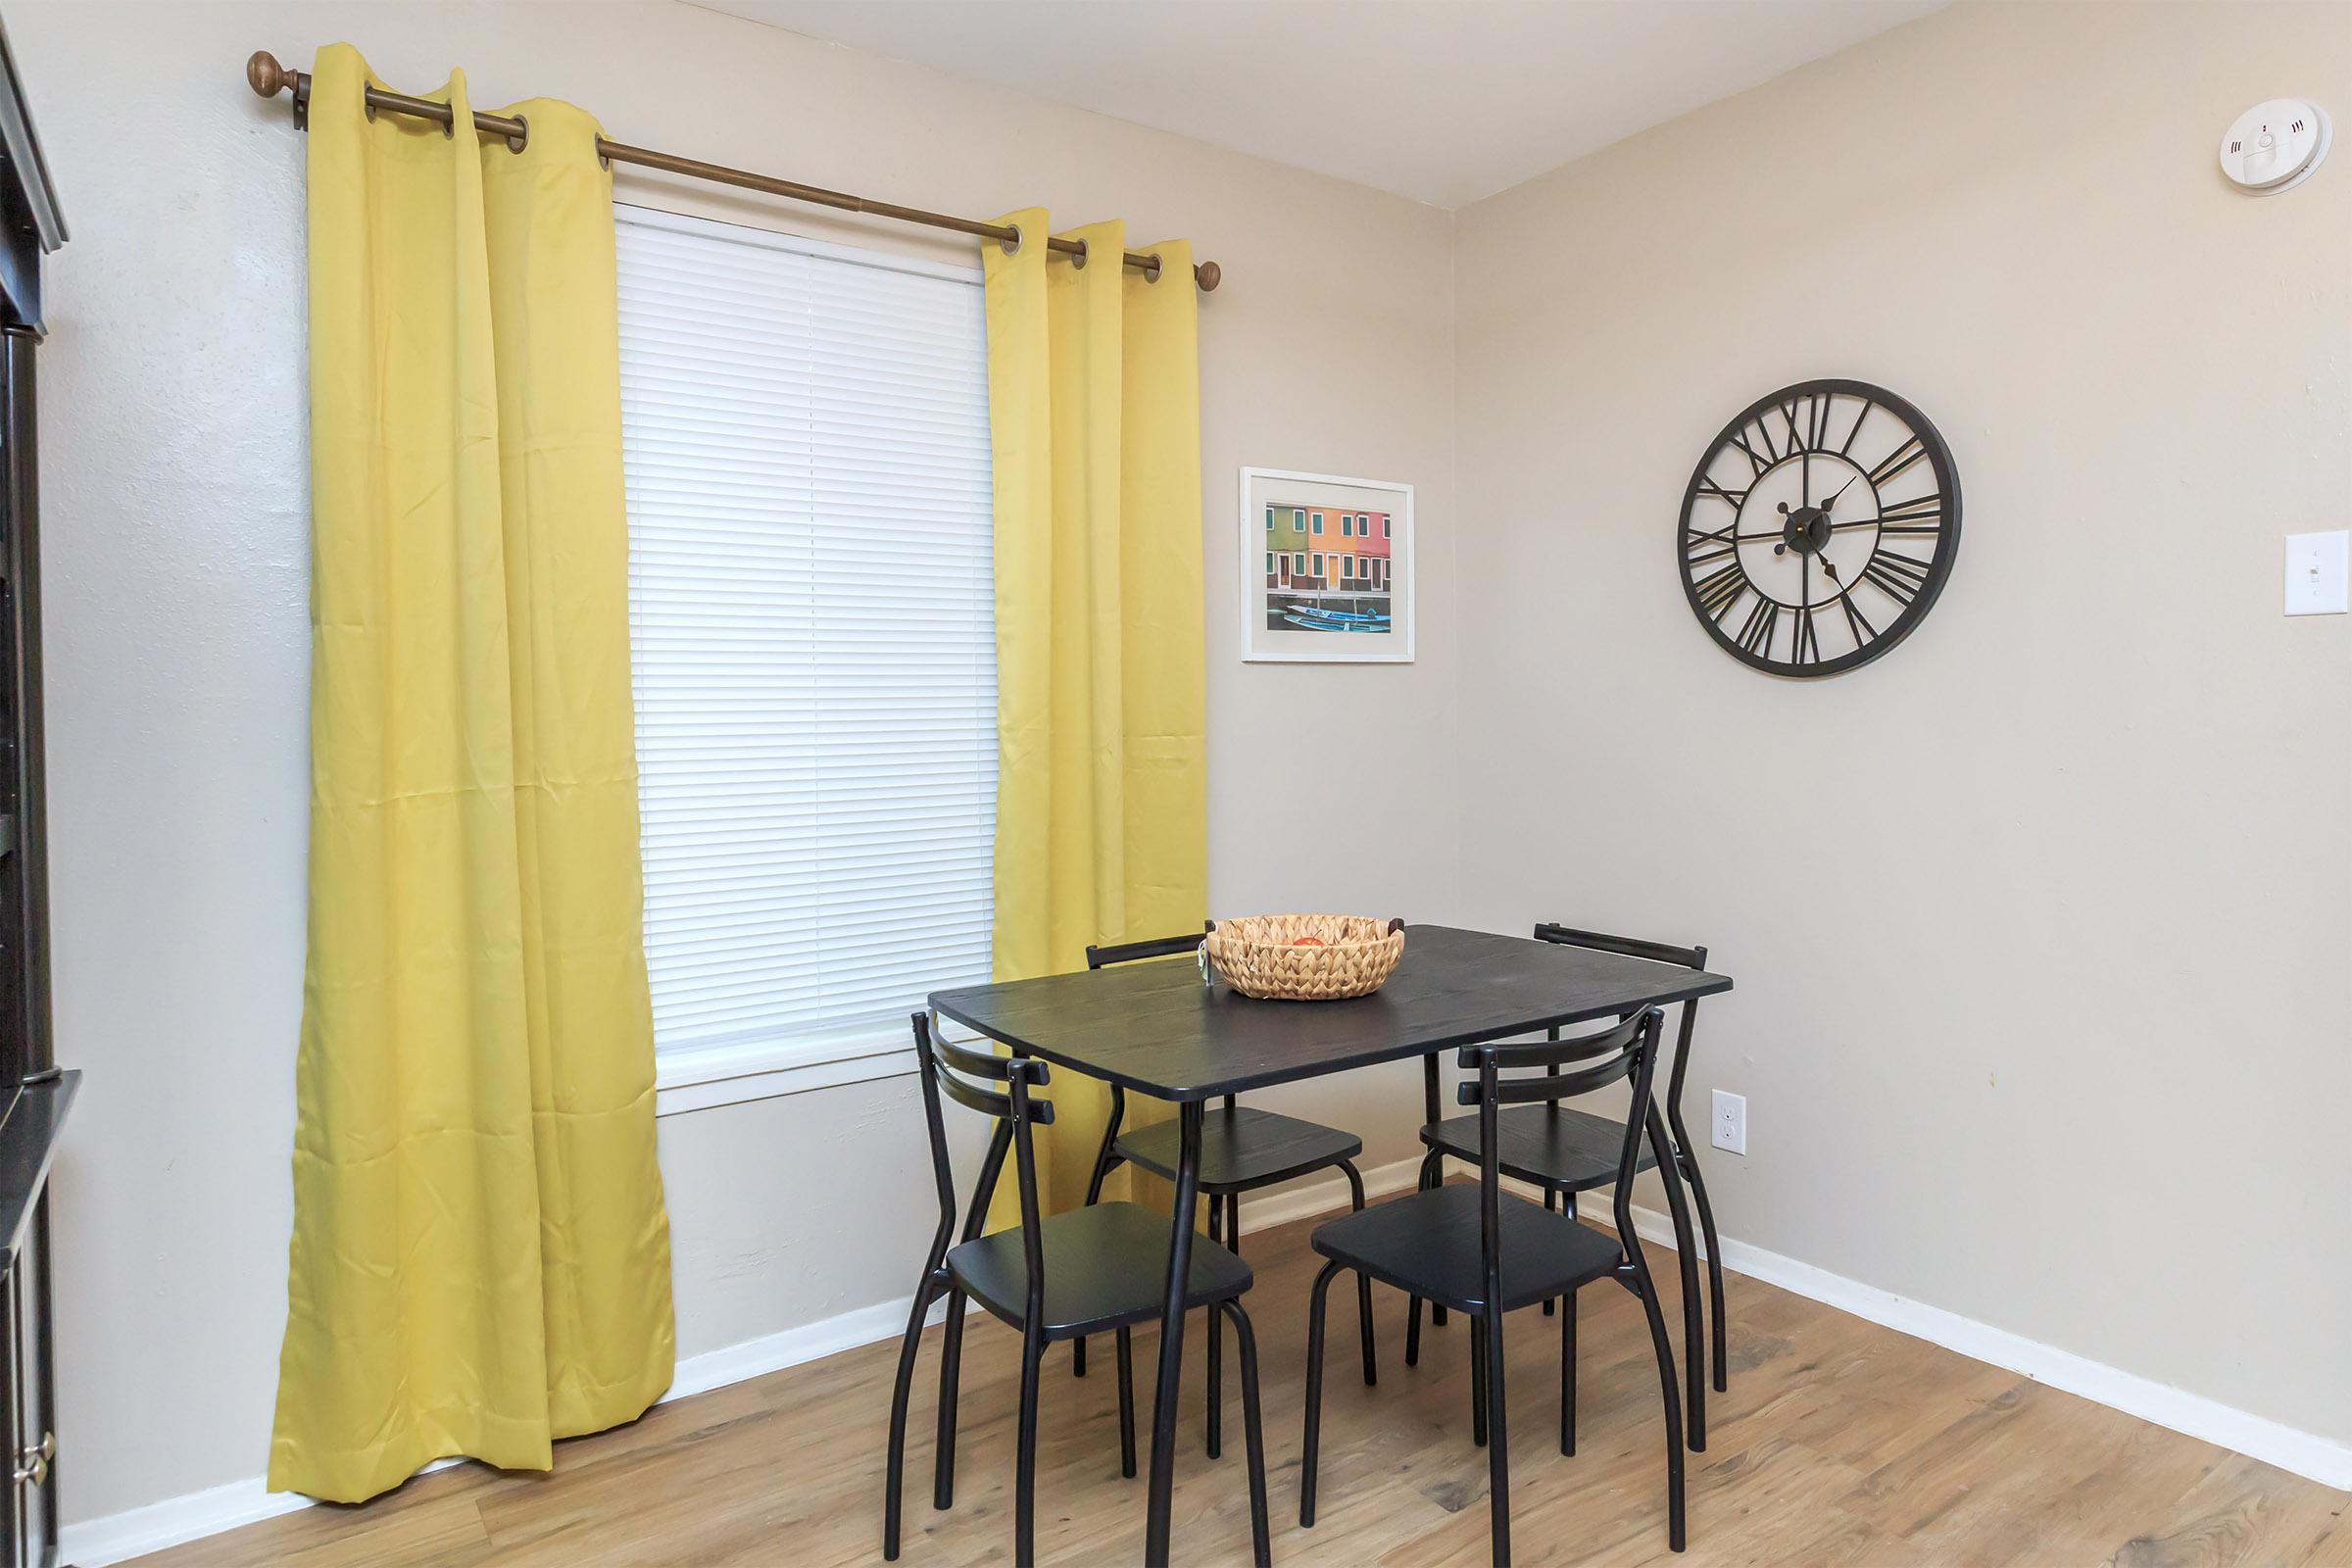 Dining room with yellow curtains